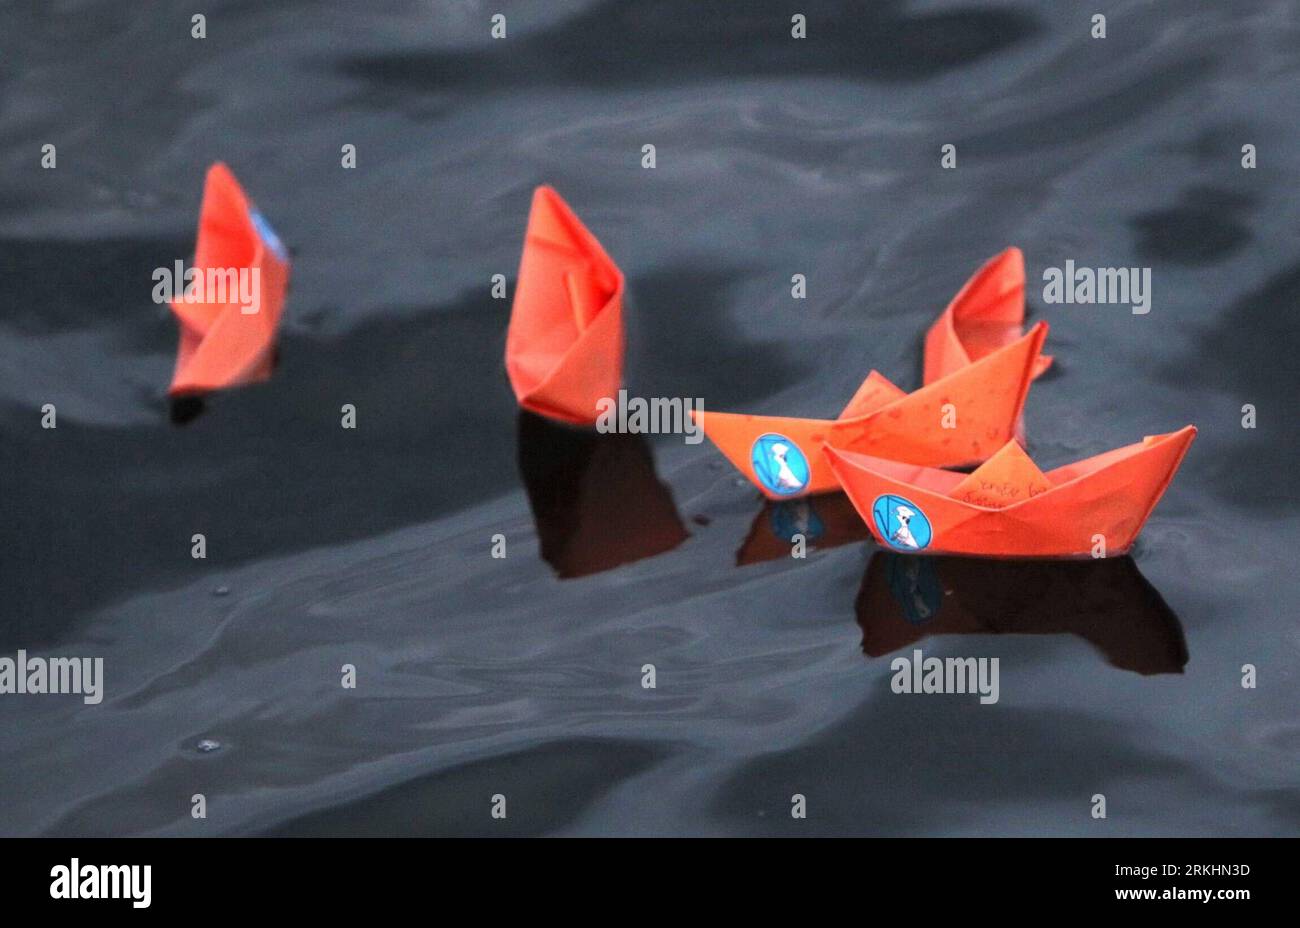 Bildnummer: 55869809  Datum: 31.08.2011  Copyright: imago/Xinhua (110831) -- SAINT PETERSBURG, Aug. 31, 2011 (Xinhua) -- Photo taken on Aug. 31, 2011 shows paper boats floating on the Neva River in Saint Petersburg, Russia. Freshmen in Saint Petersburg University wrote their wishes for the upcoming new school year on paper boats and laid them on the Neva River on Wednesday. (Xinhua/Lu Jinbo) RUSSIA-SAINT PETERSBURG-PAPER-BOAT-WISH PUBLICATIONxNOTxINxCHN Gesellschaft Tradition Schüler Schule Bildung Papierboot xns x0x 2011 quer     Bildnummer 55869809 Date 31 08 2011 Copyright Imago XINHUA  Sai Stock Photo